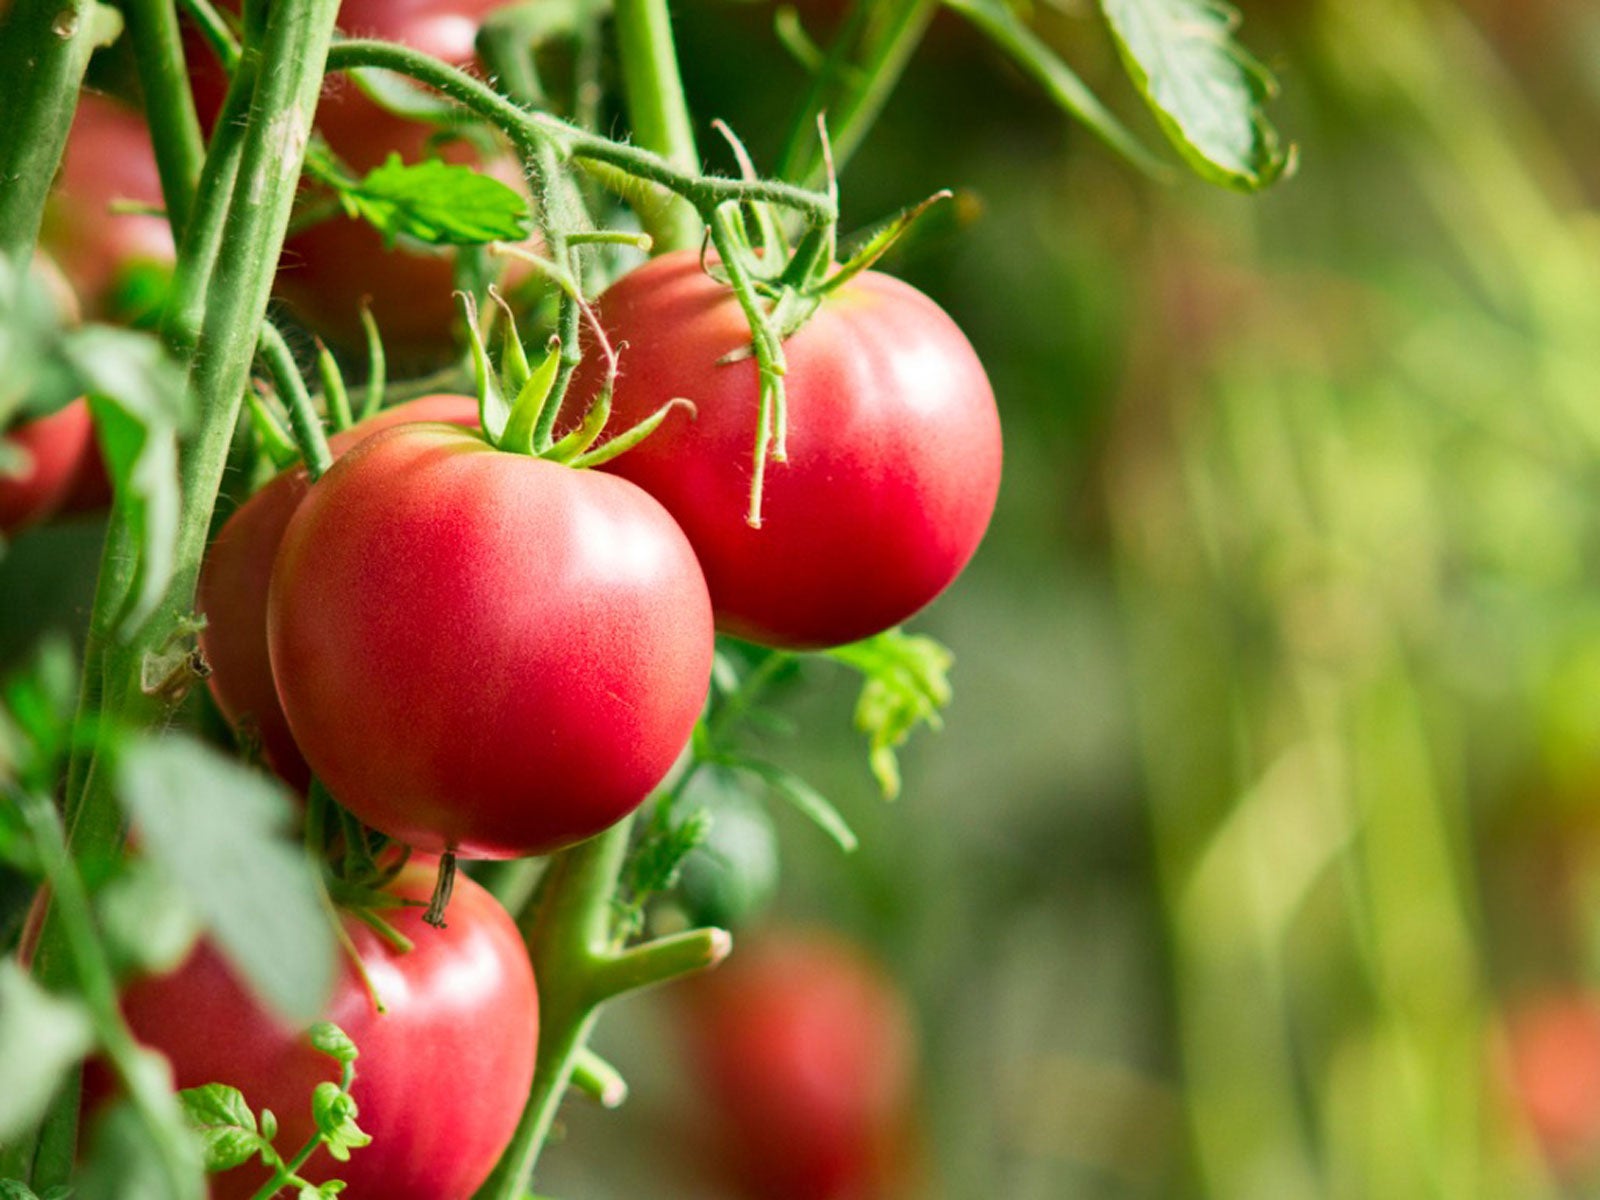 Researching Before Grafting Dwarfs for Tomatoes: Tips for Growing Healthy, Productive Plants